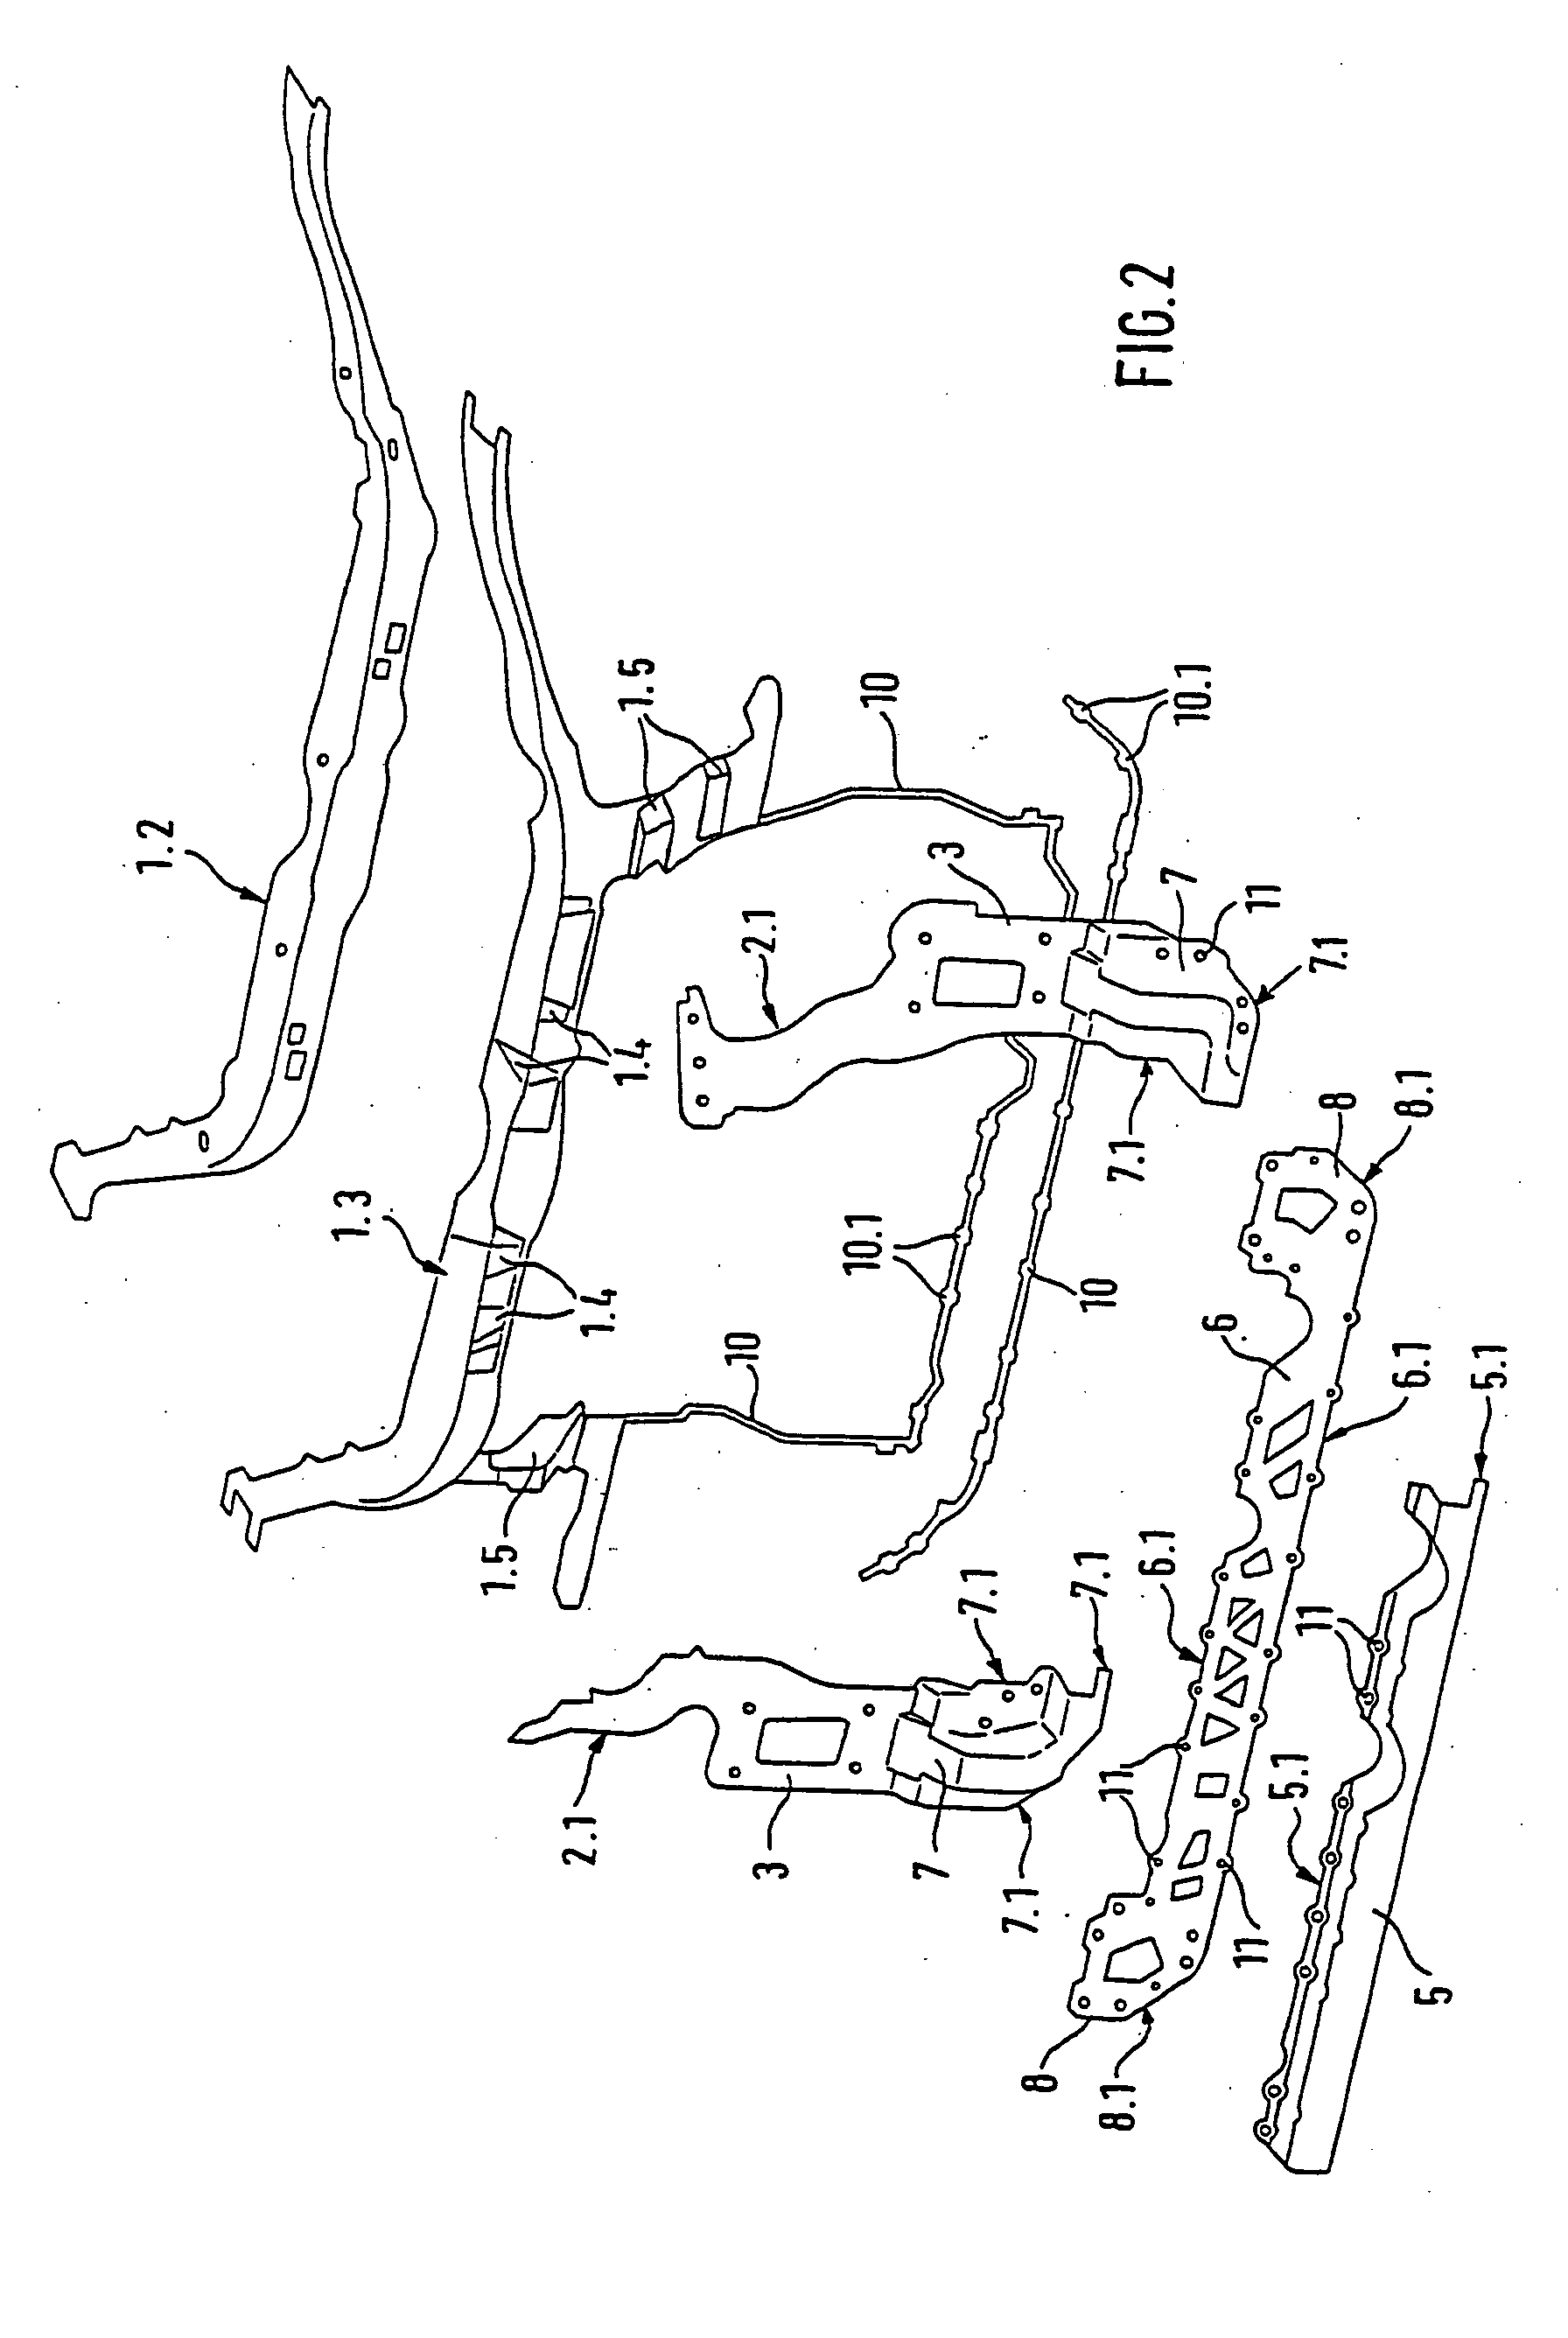 Hybrid-structure assembly support